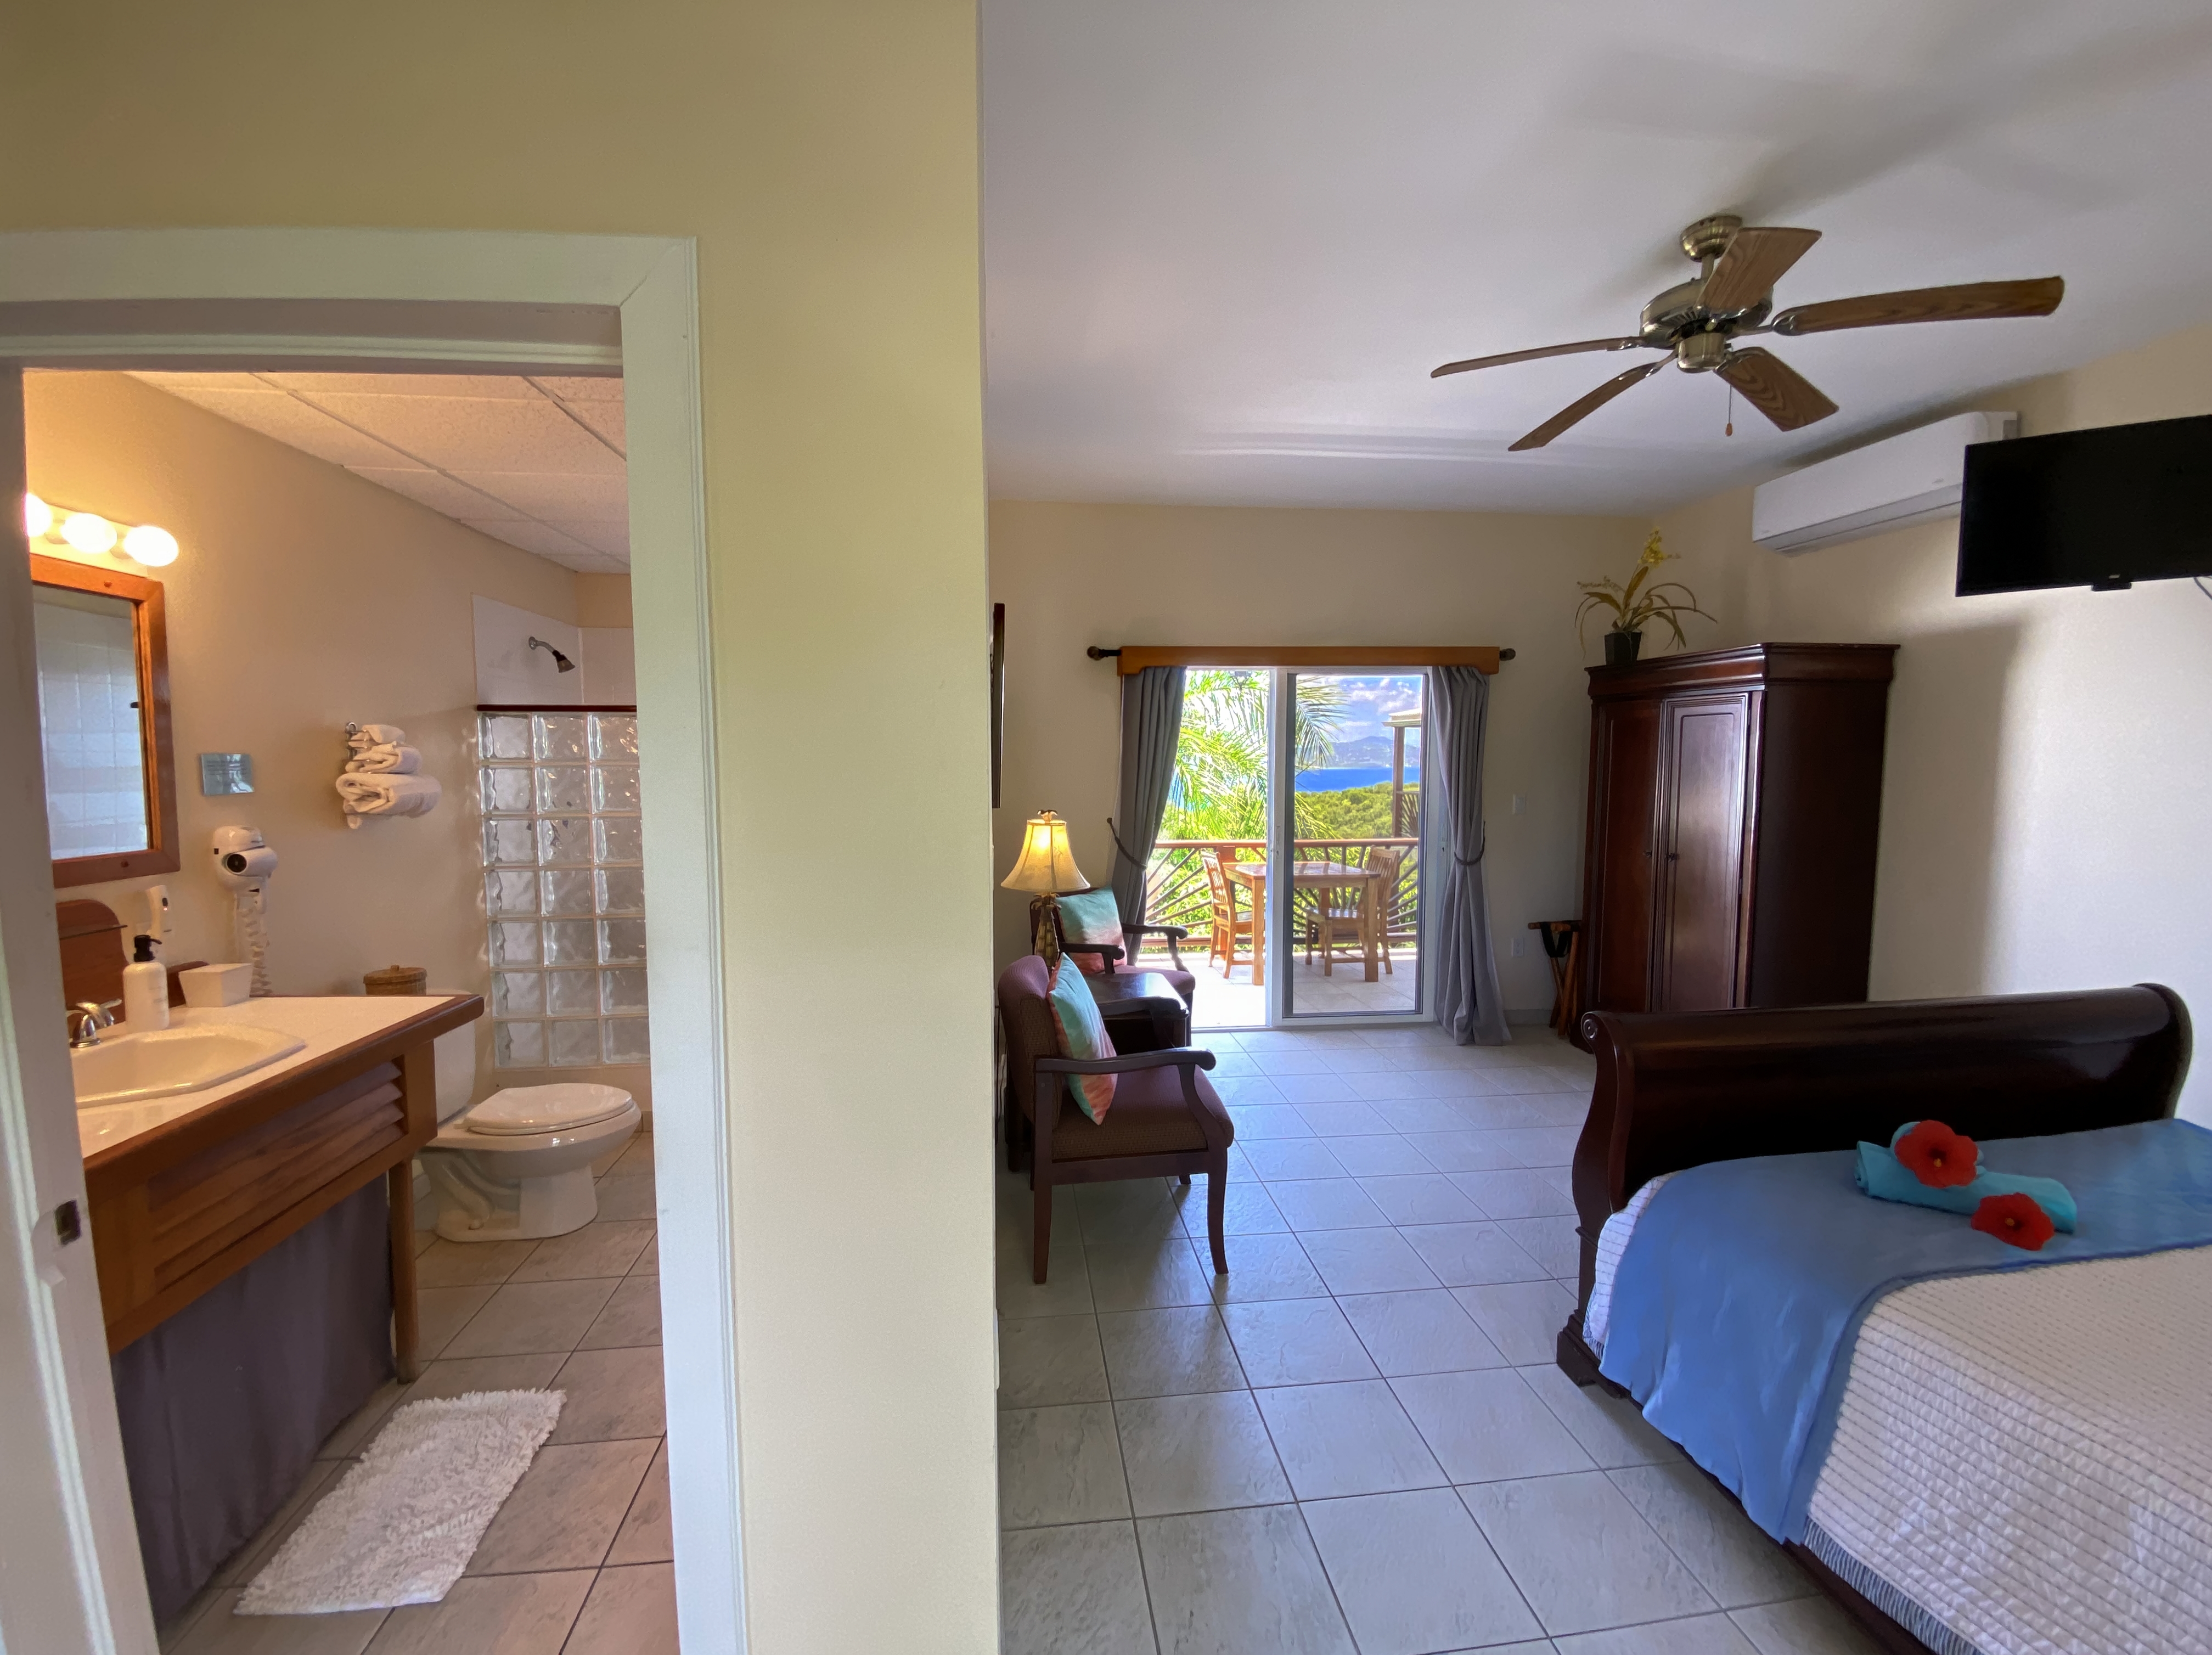 Afforable and budget friendly places to stay in Virgin Islands
